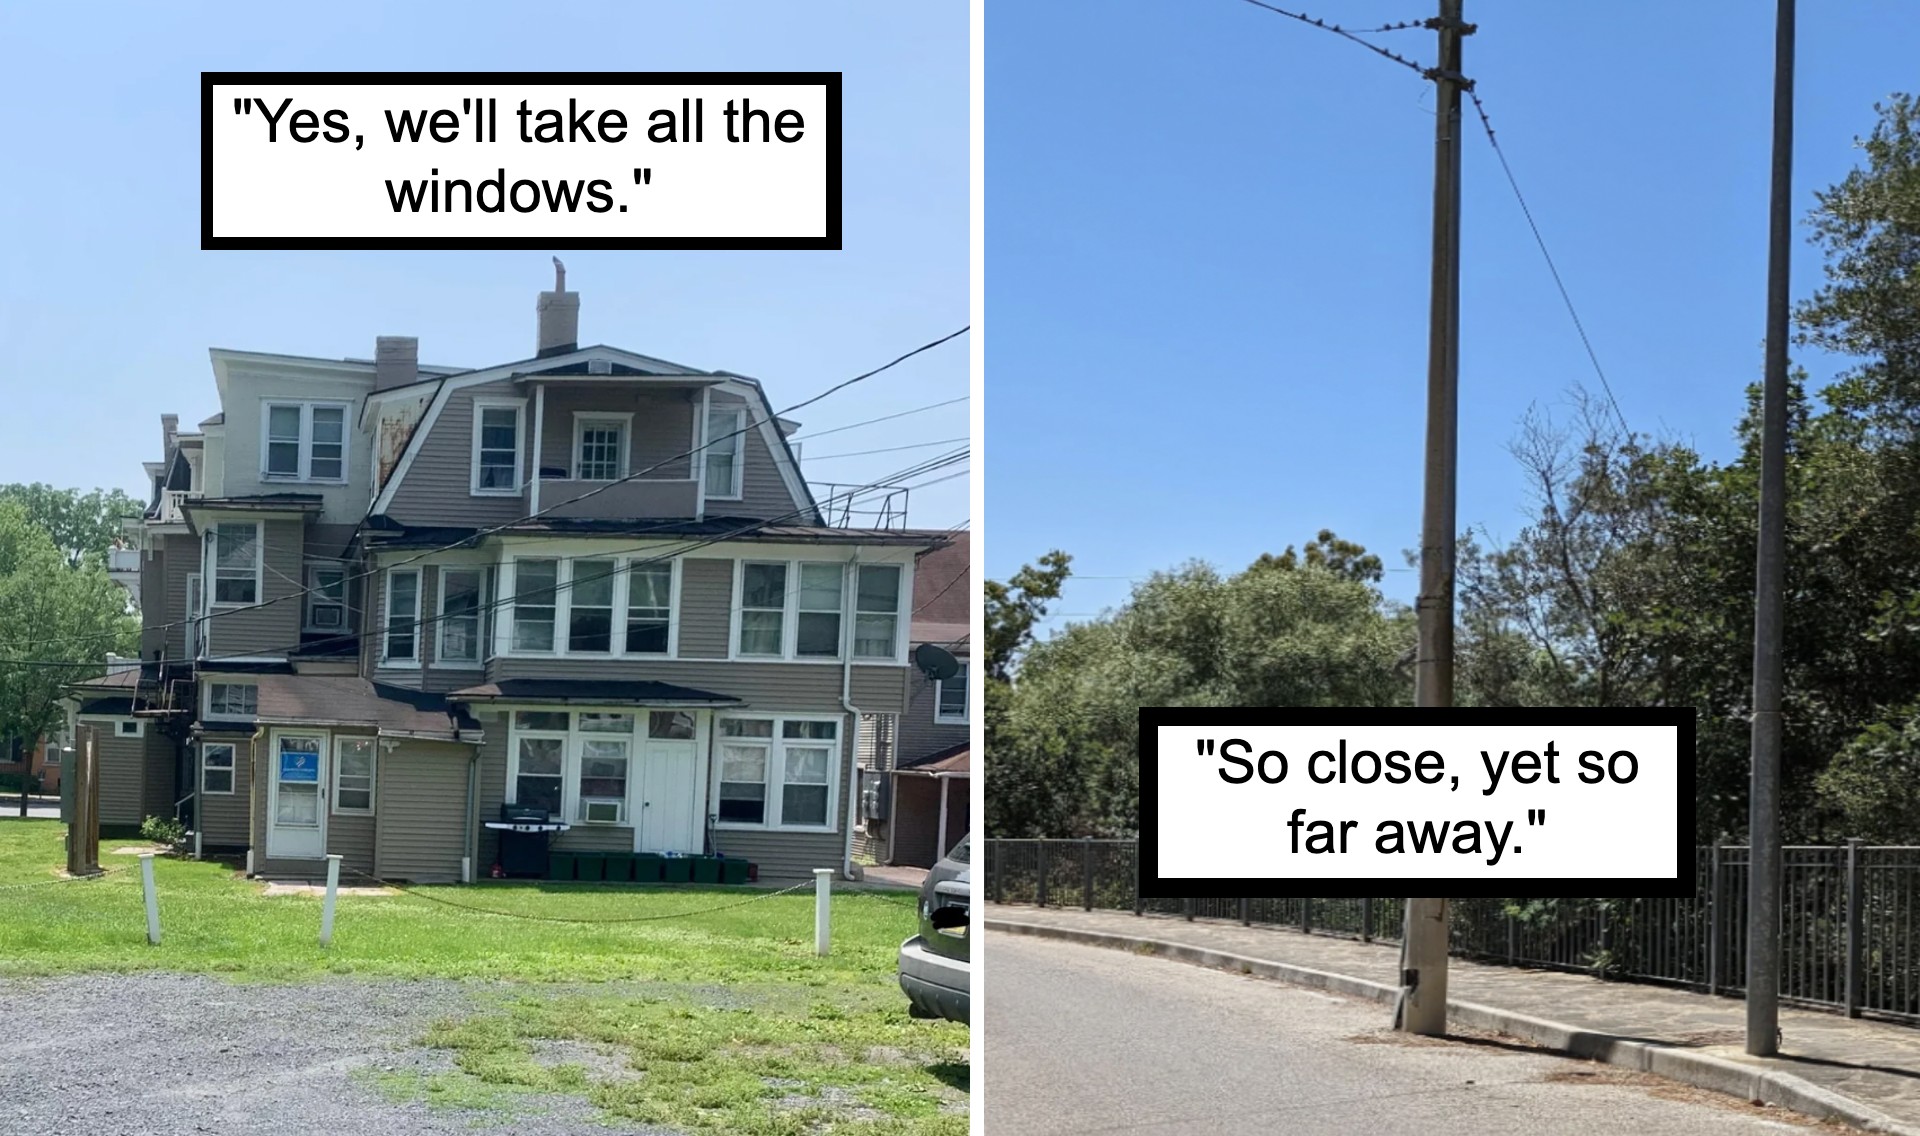 Left image: A multi-story house with several window styles and sizes, captioned "Yes, we'll take all the windows." Right image: A lone, tall streetlight without a light fixture, captioned "So close, yet so far away.